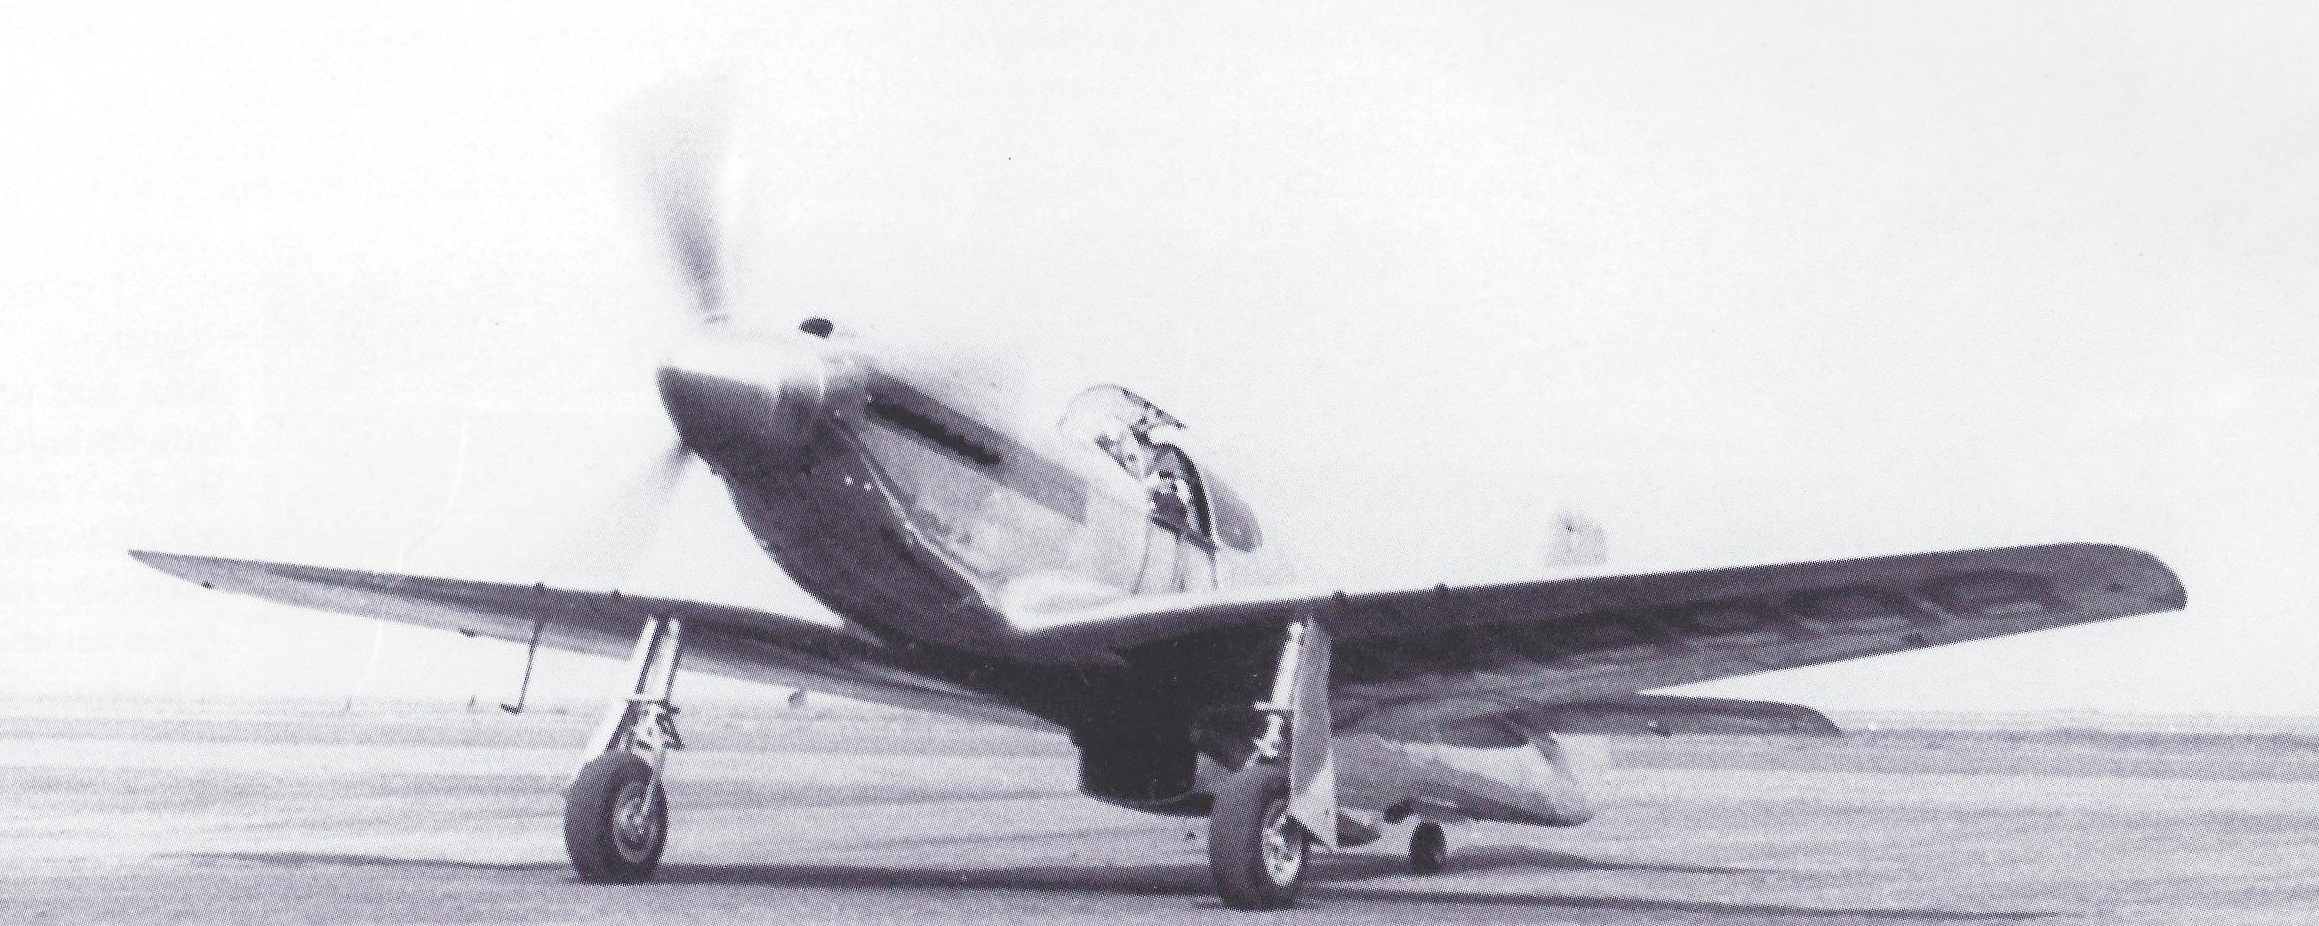 North American Aviation's NA-73X fighter prototype, engine idling, with Vance Breese in the cockpit at Mines Field, Los Angeles, 26 October 1941. (North American Aviation Inc.)